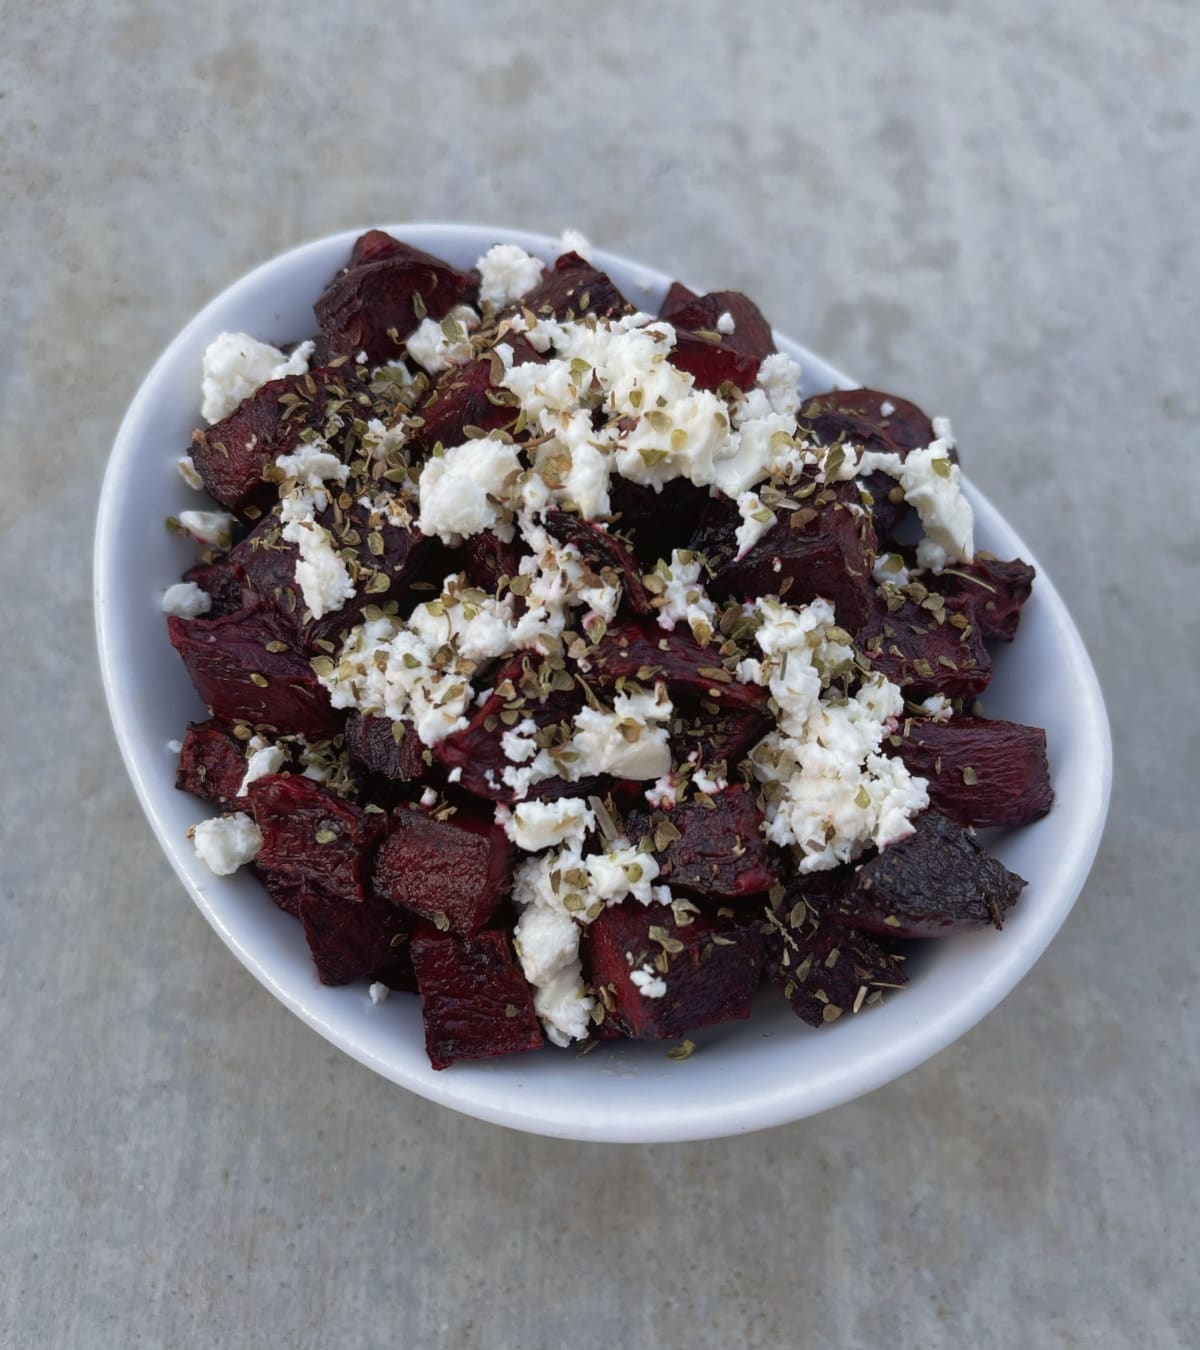 Crispy roasted beets with crumbled feta and dried oregano in white bowl.